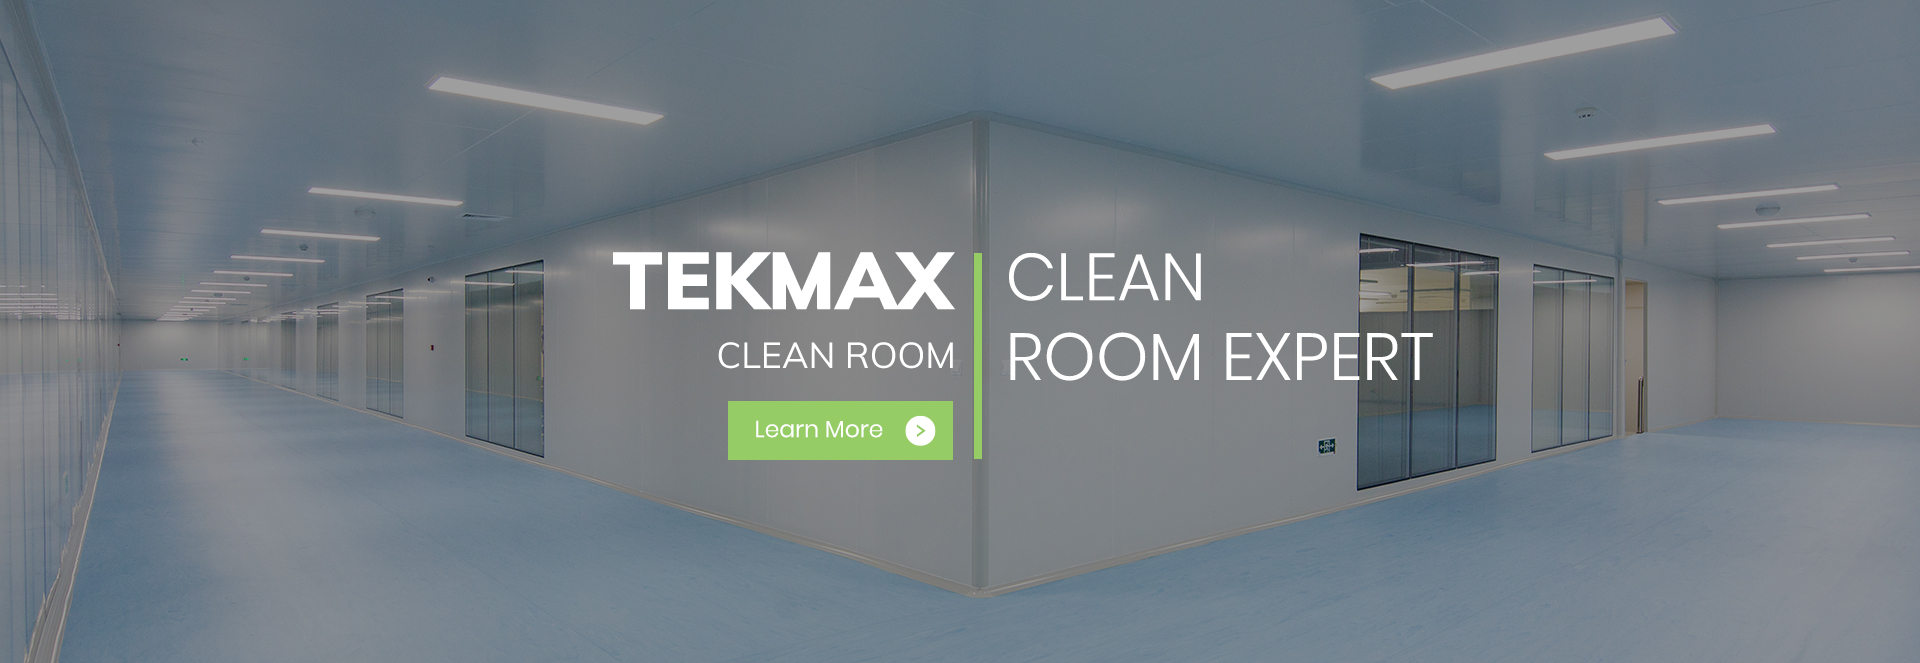 Air handling system, Electrical system - Tekmax